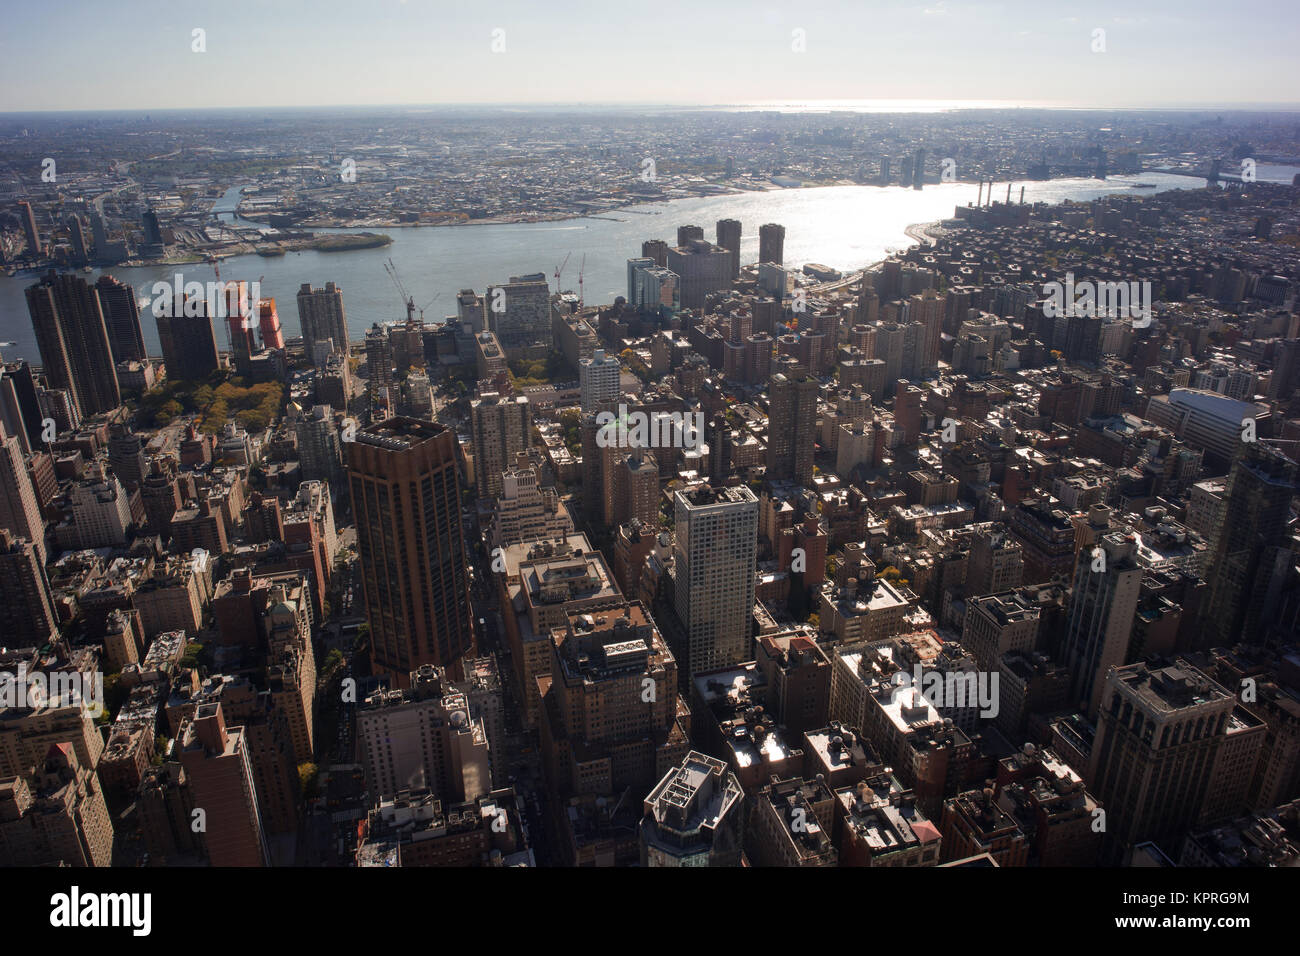 new york city is a cosmopolitan city on the east coast of the united states. Stock Photo